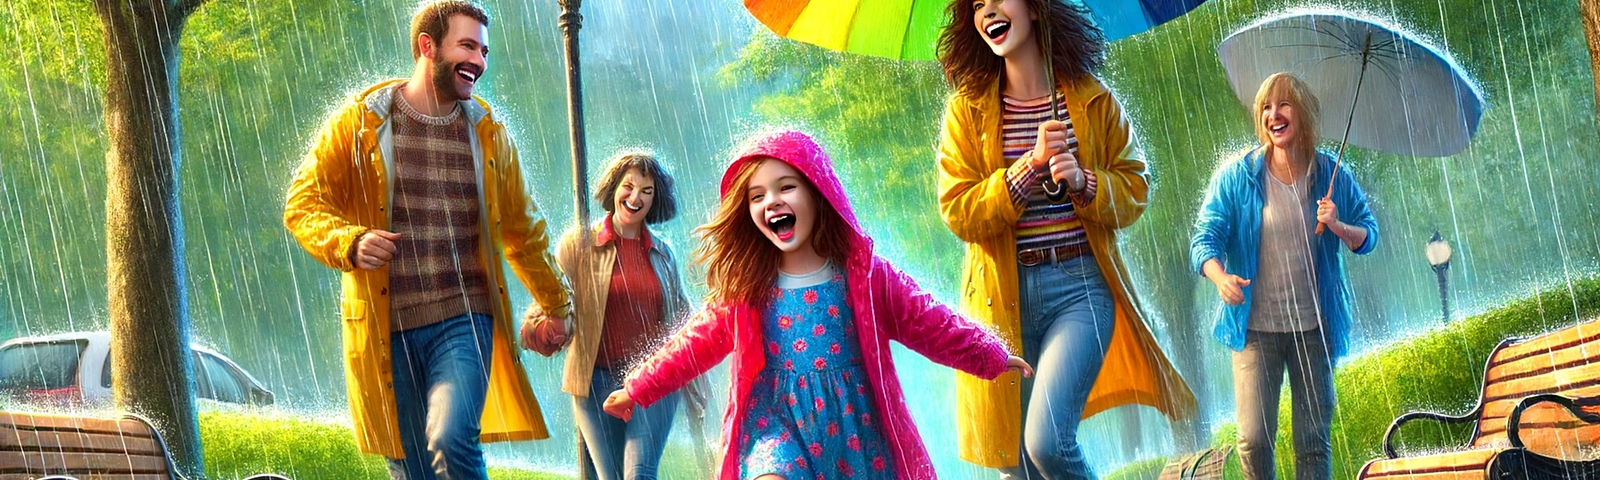 Mia and her parents make the best of the rainy spring day, turning it into a joyful and memorable experience.